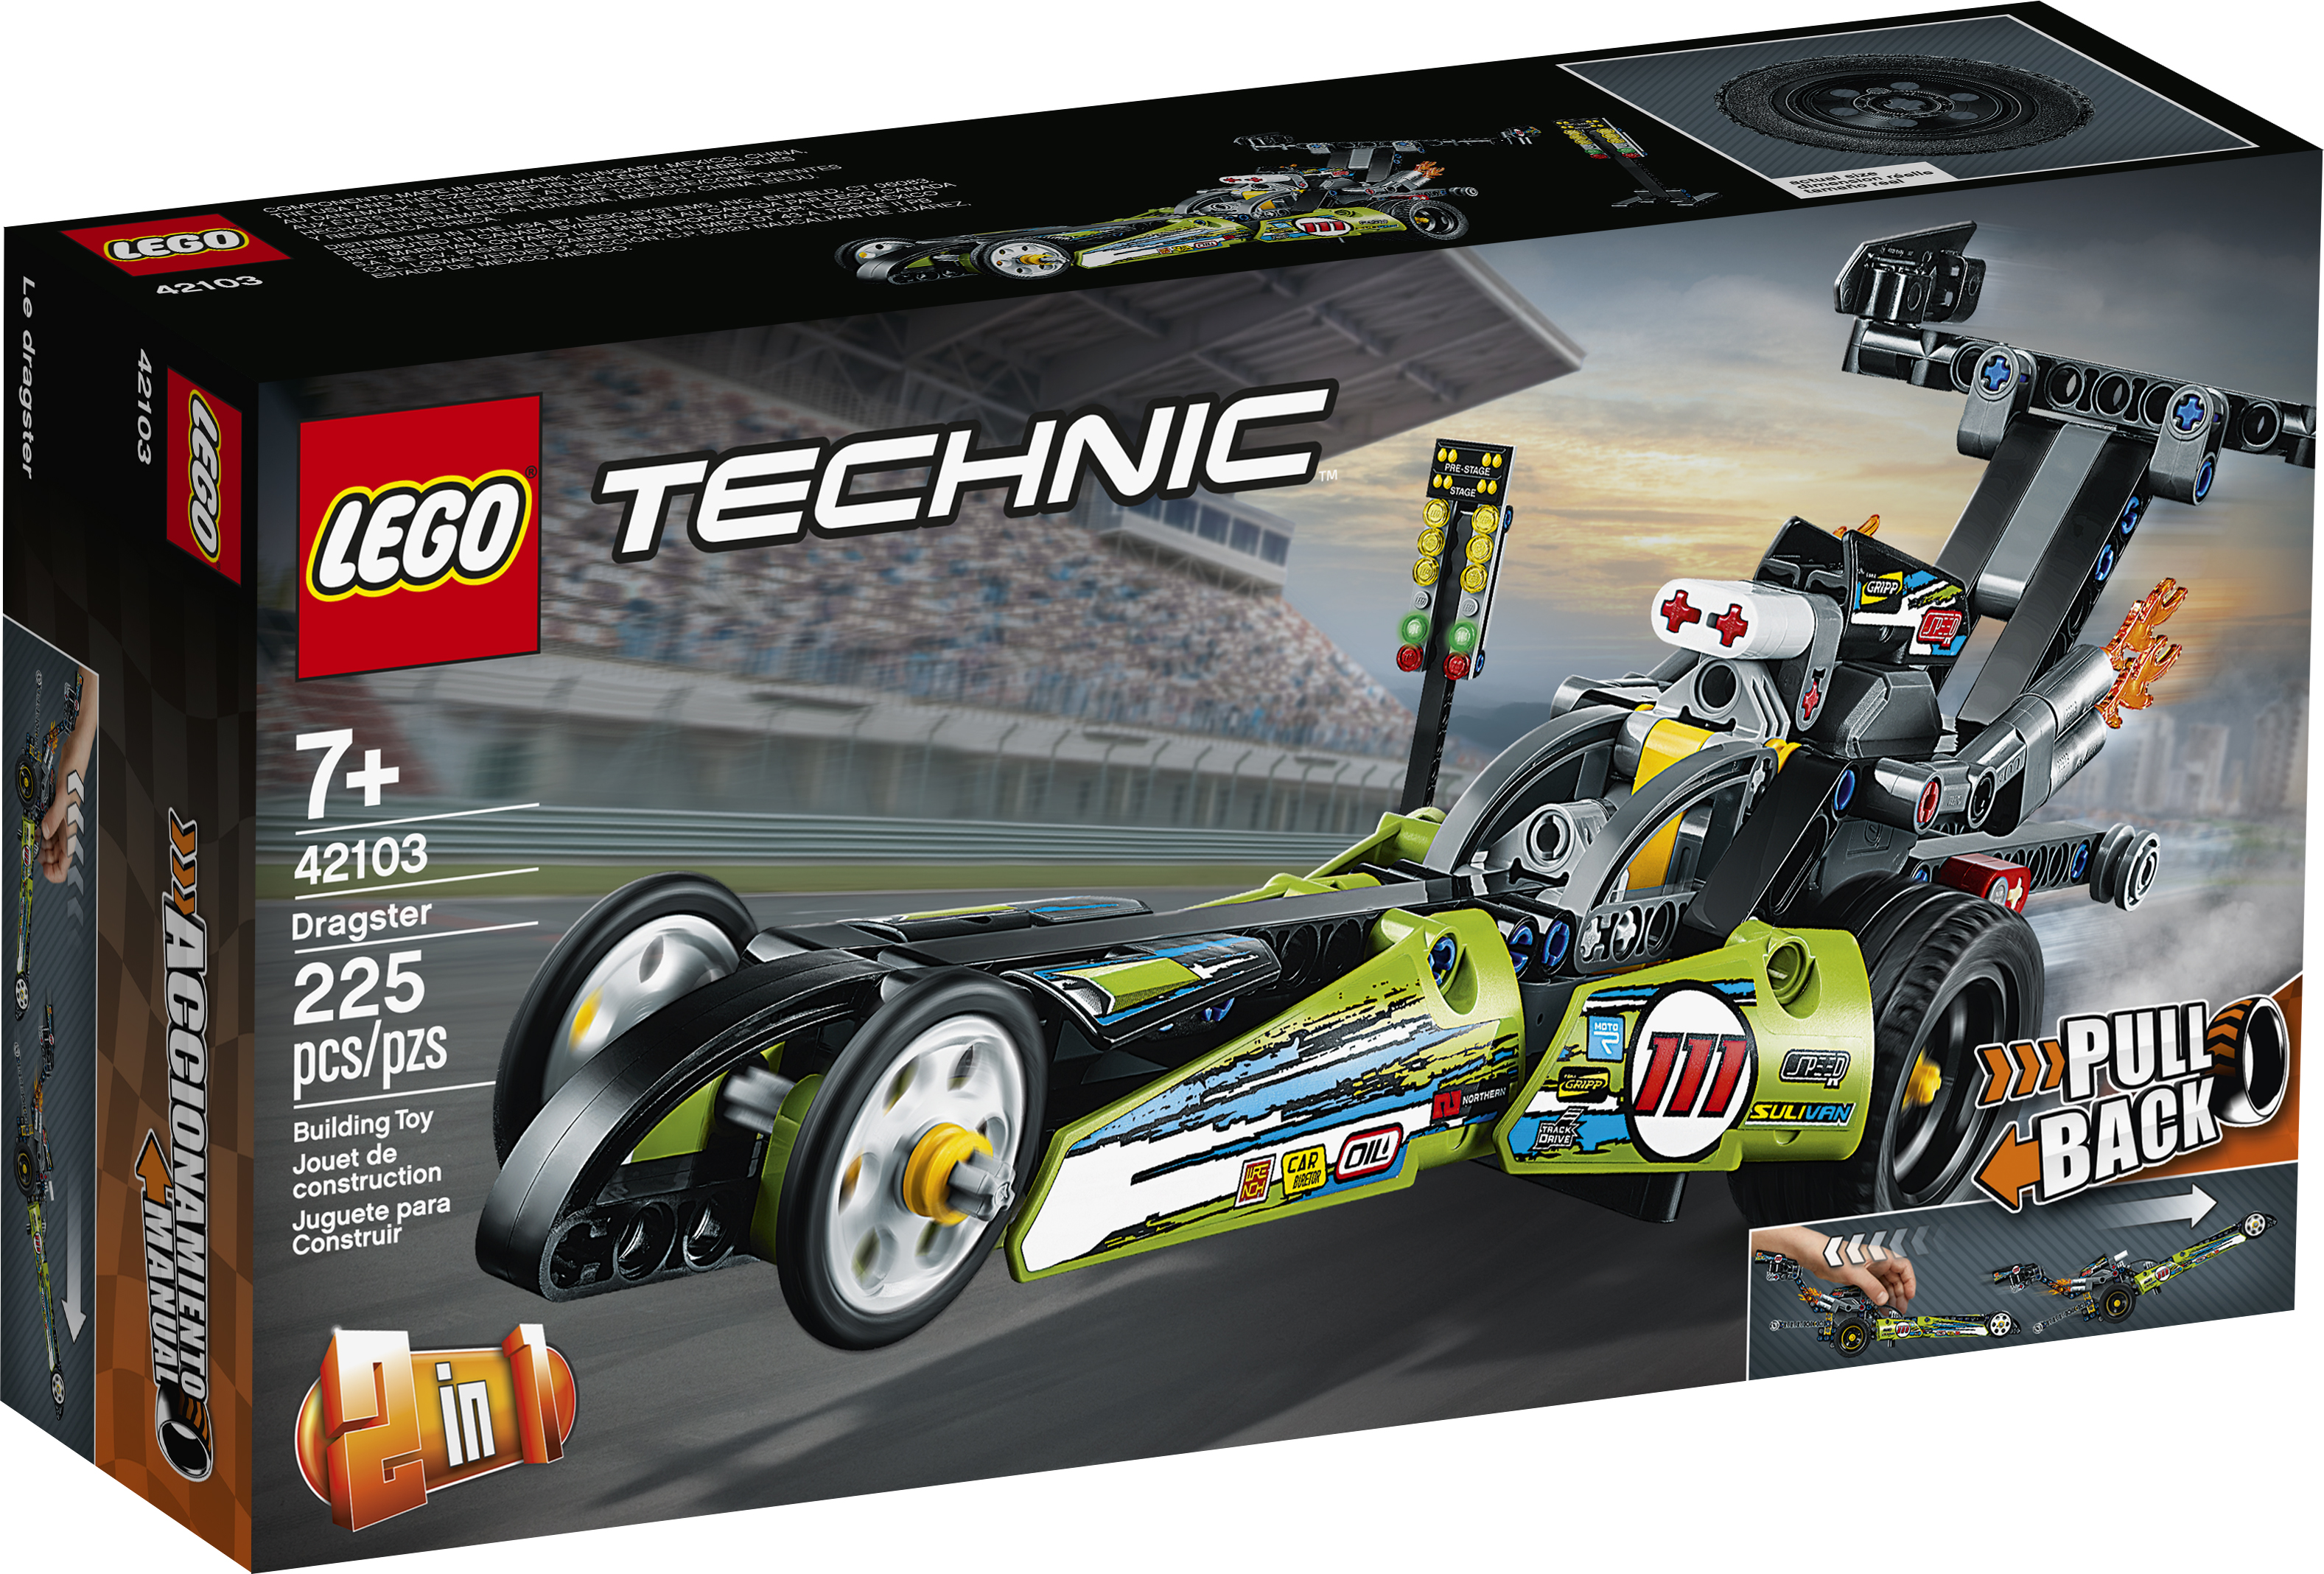 LEGO Technic Dragster 42103 Pull-Back Racing Toy Building Kit (225 pieces) - image 5 of 7